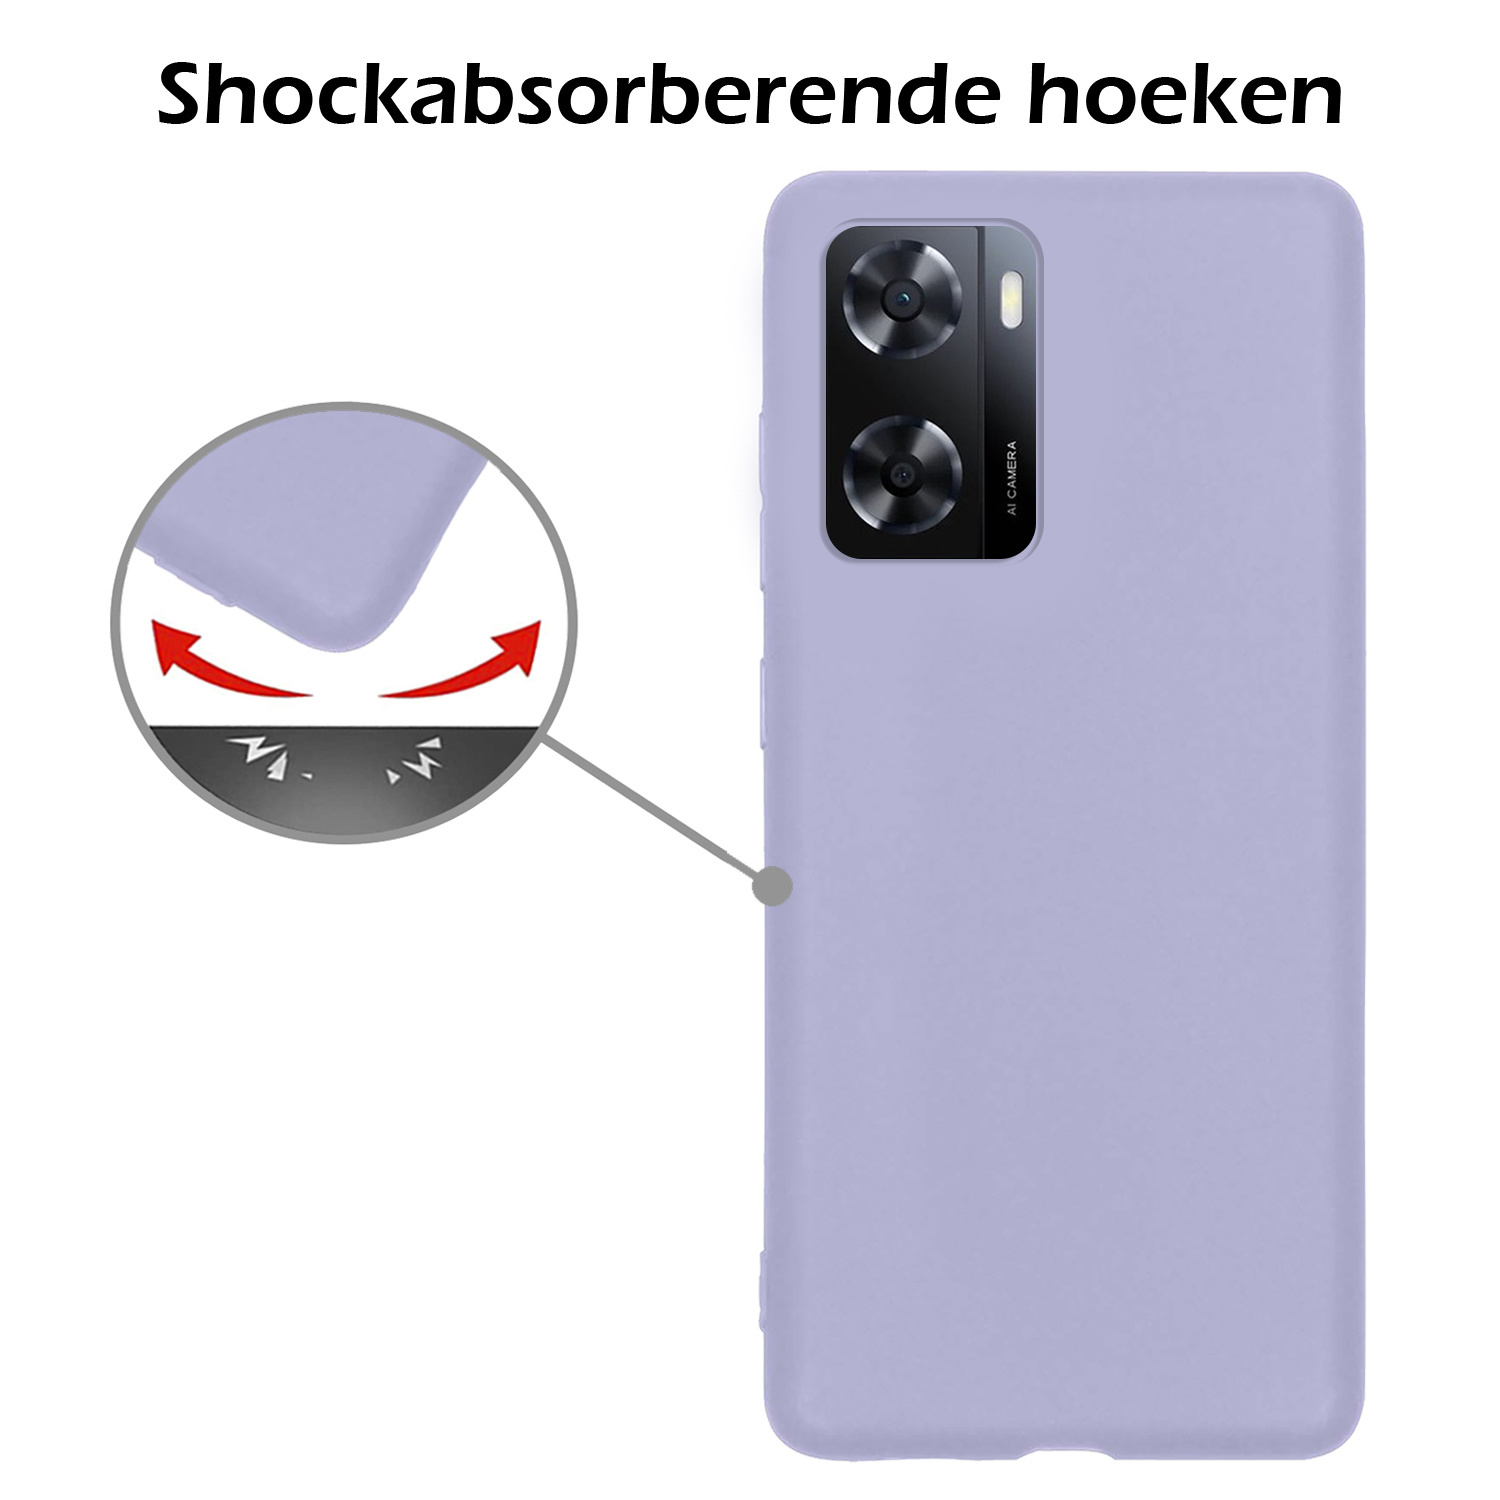 OPPO A57s Hoesje Siliconen Case Back Cover Met Screenprotector - OPPO A57s Hoes Cover Silicone - Lila